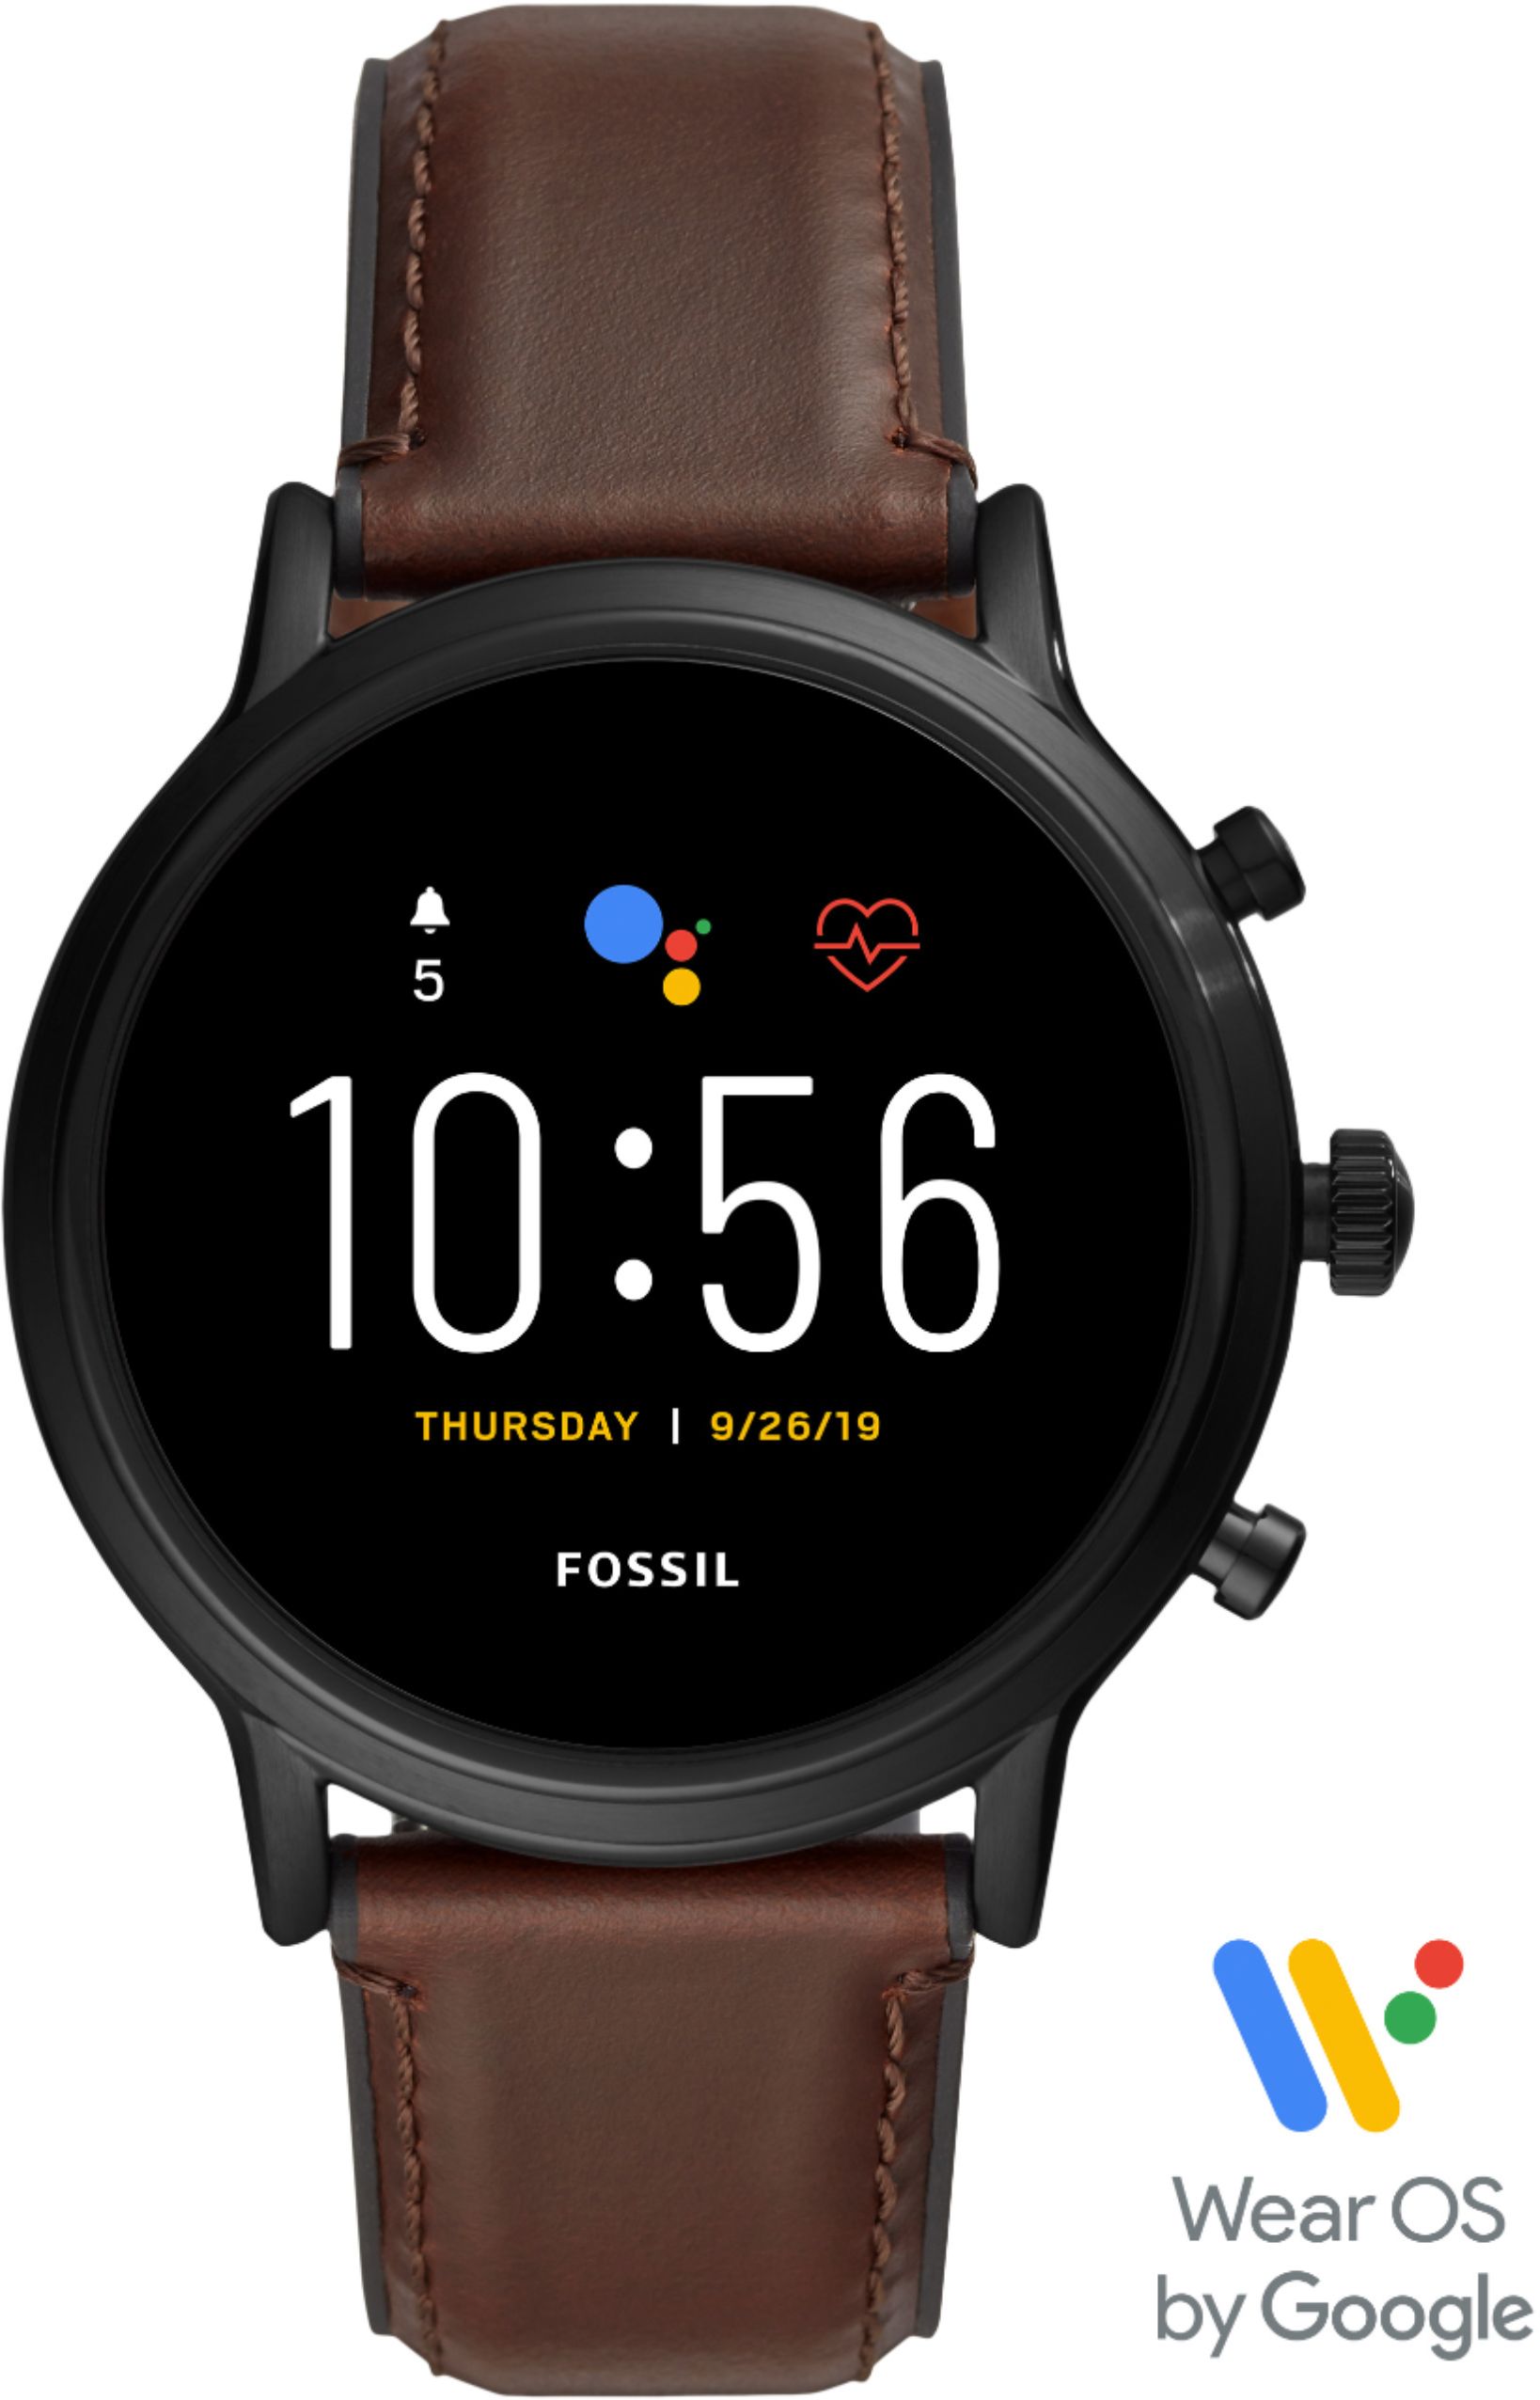 Fossil Gen 5 Smartwatch 44mm Stainless Steel Black with Brown Leather Band FTW4026 - Best Buy